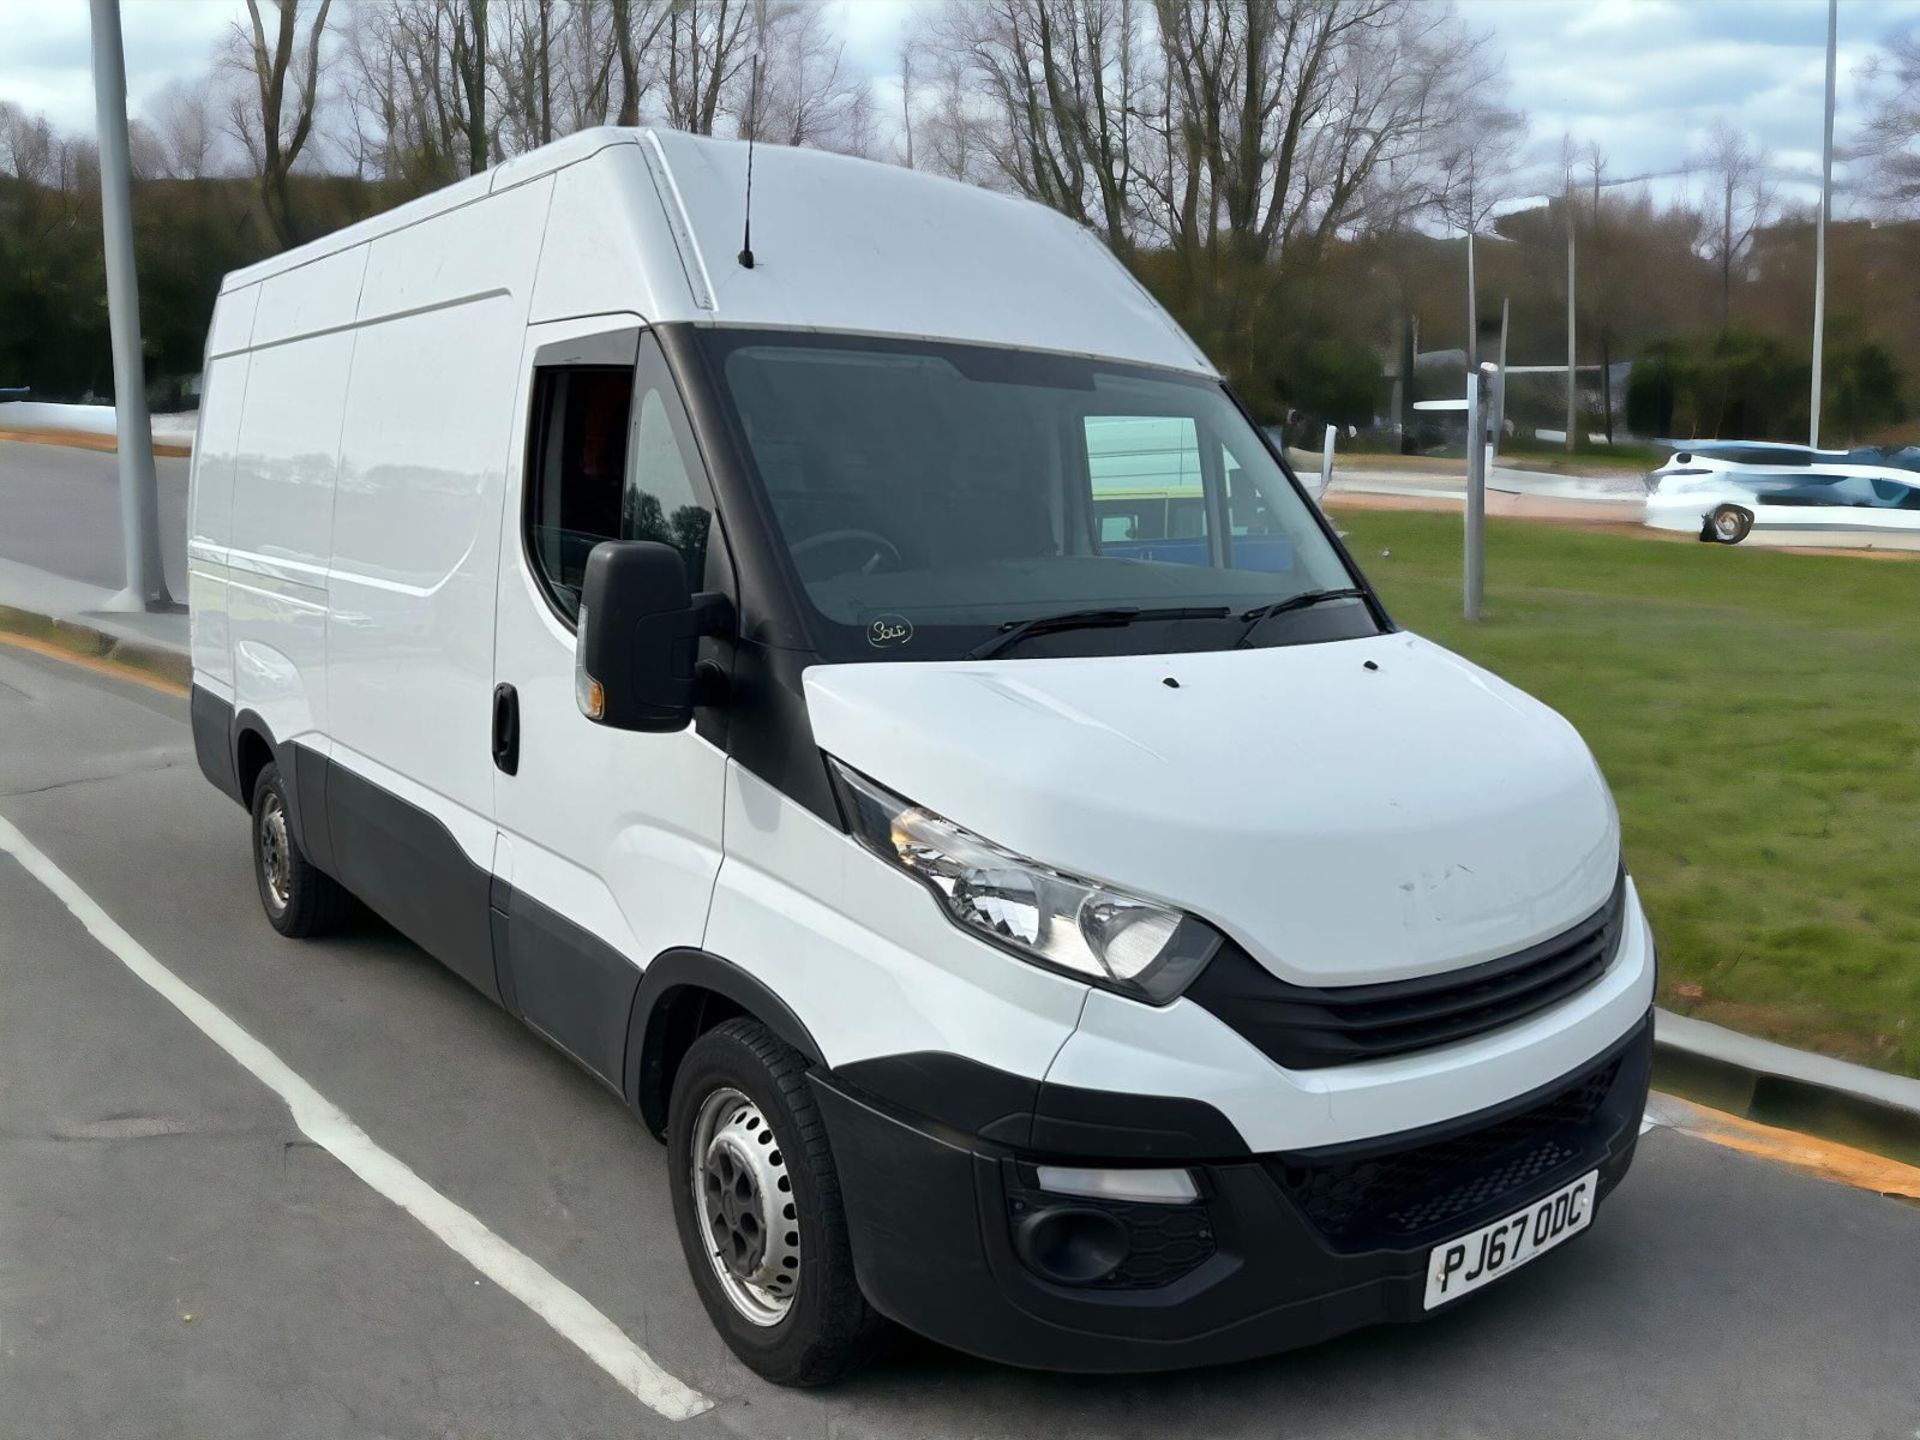 2017-67 REG IVECO DAILY 35S -HPI CLEAR - READY FOR WORK! - Bild 5 aus 12